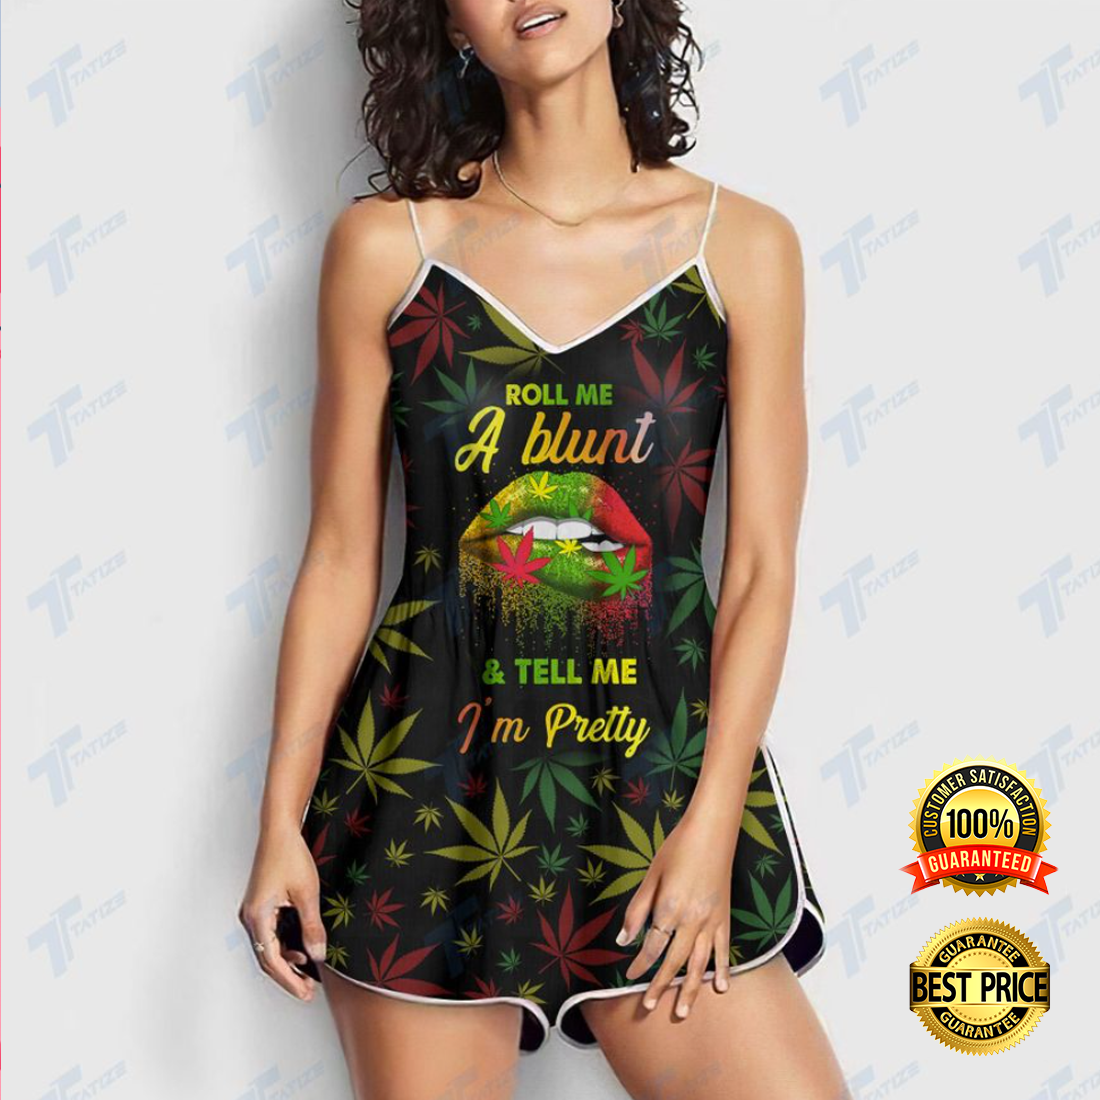 Rool me a blunt and tell me i m pretty romper 4